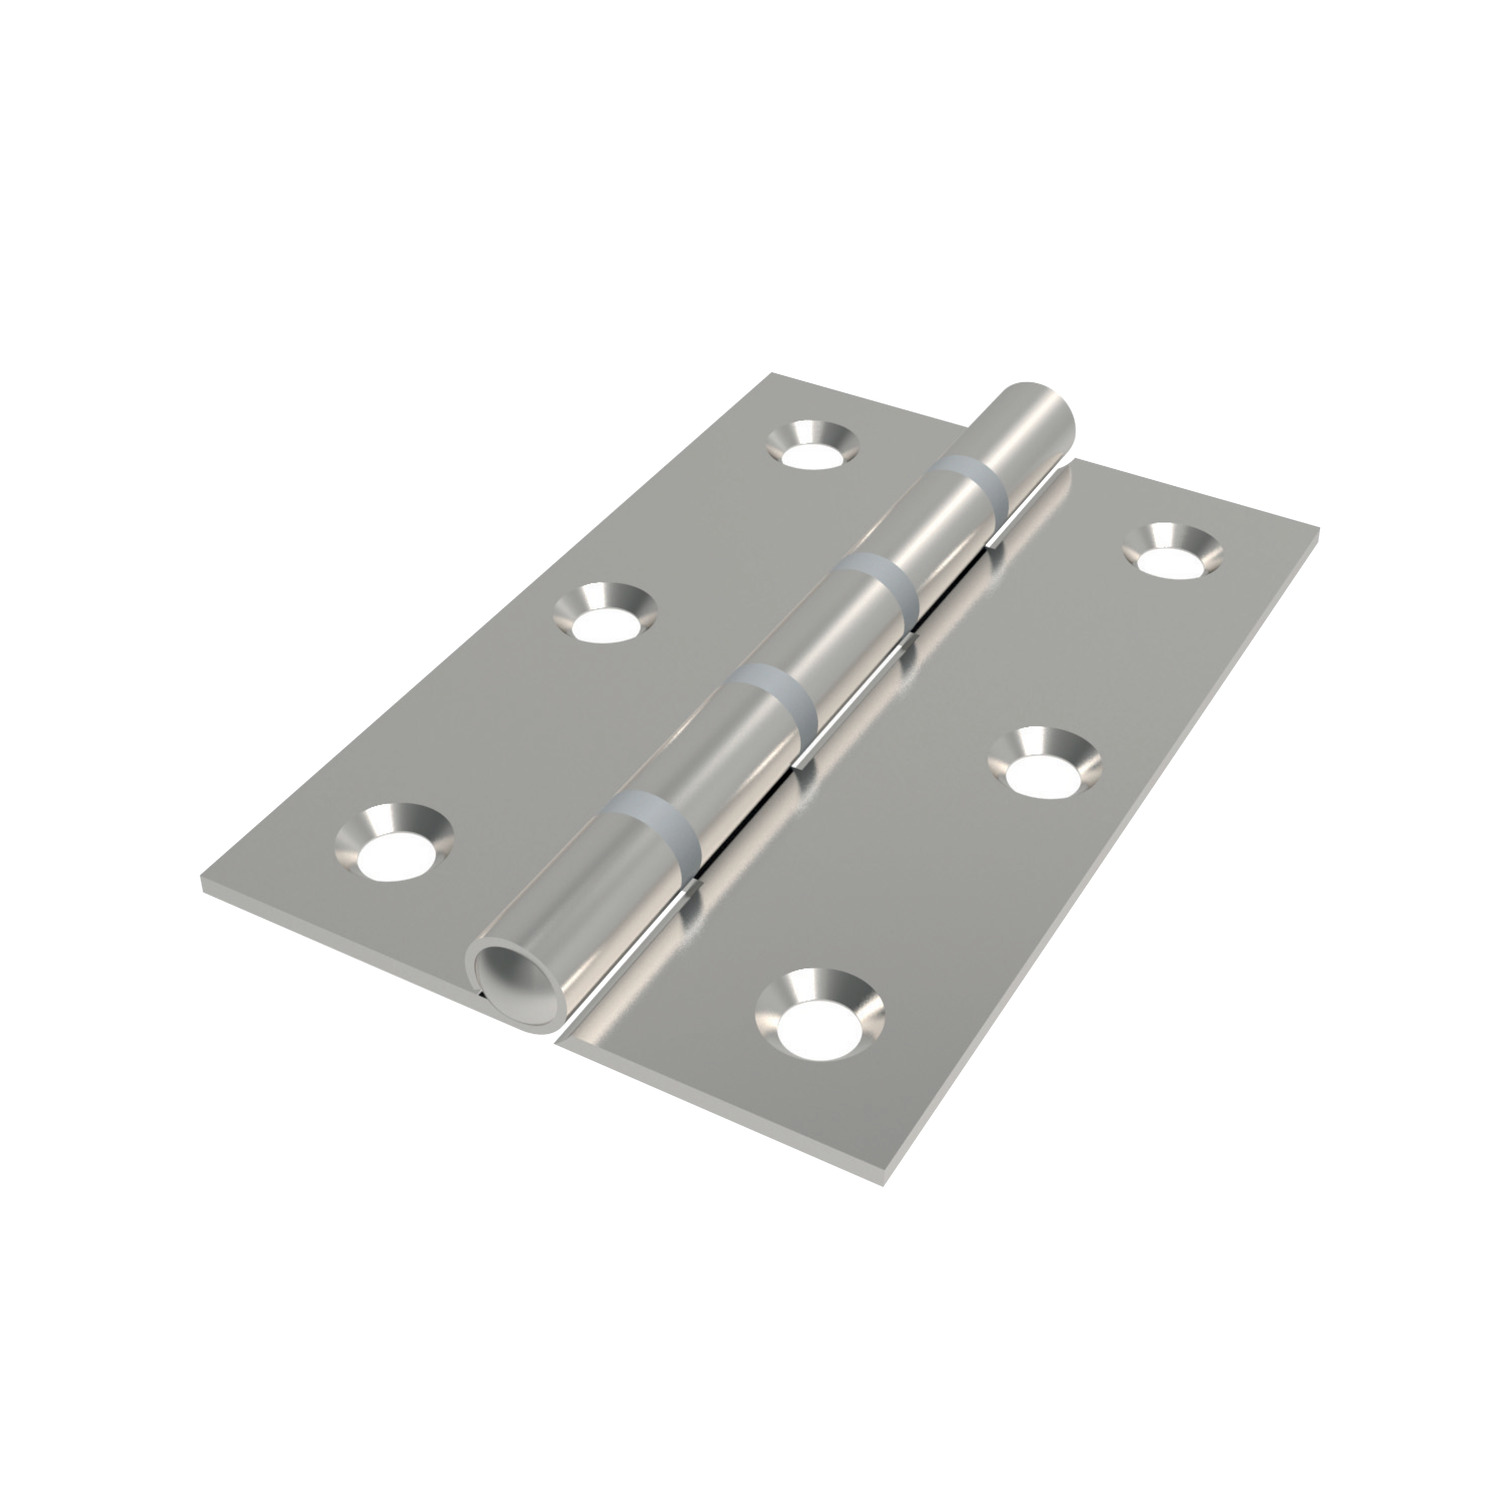 S0700.AC0010 Surface Mount - Leaf hinges - SS. 102 - 9,0 - 28 - 70,0